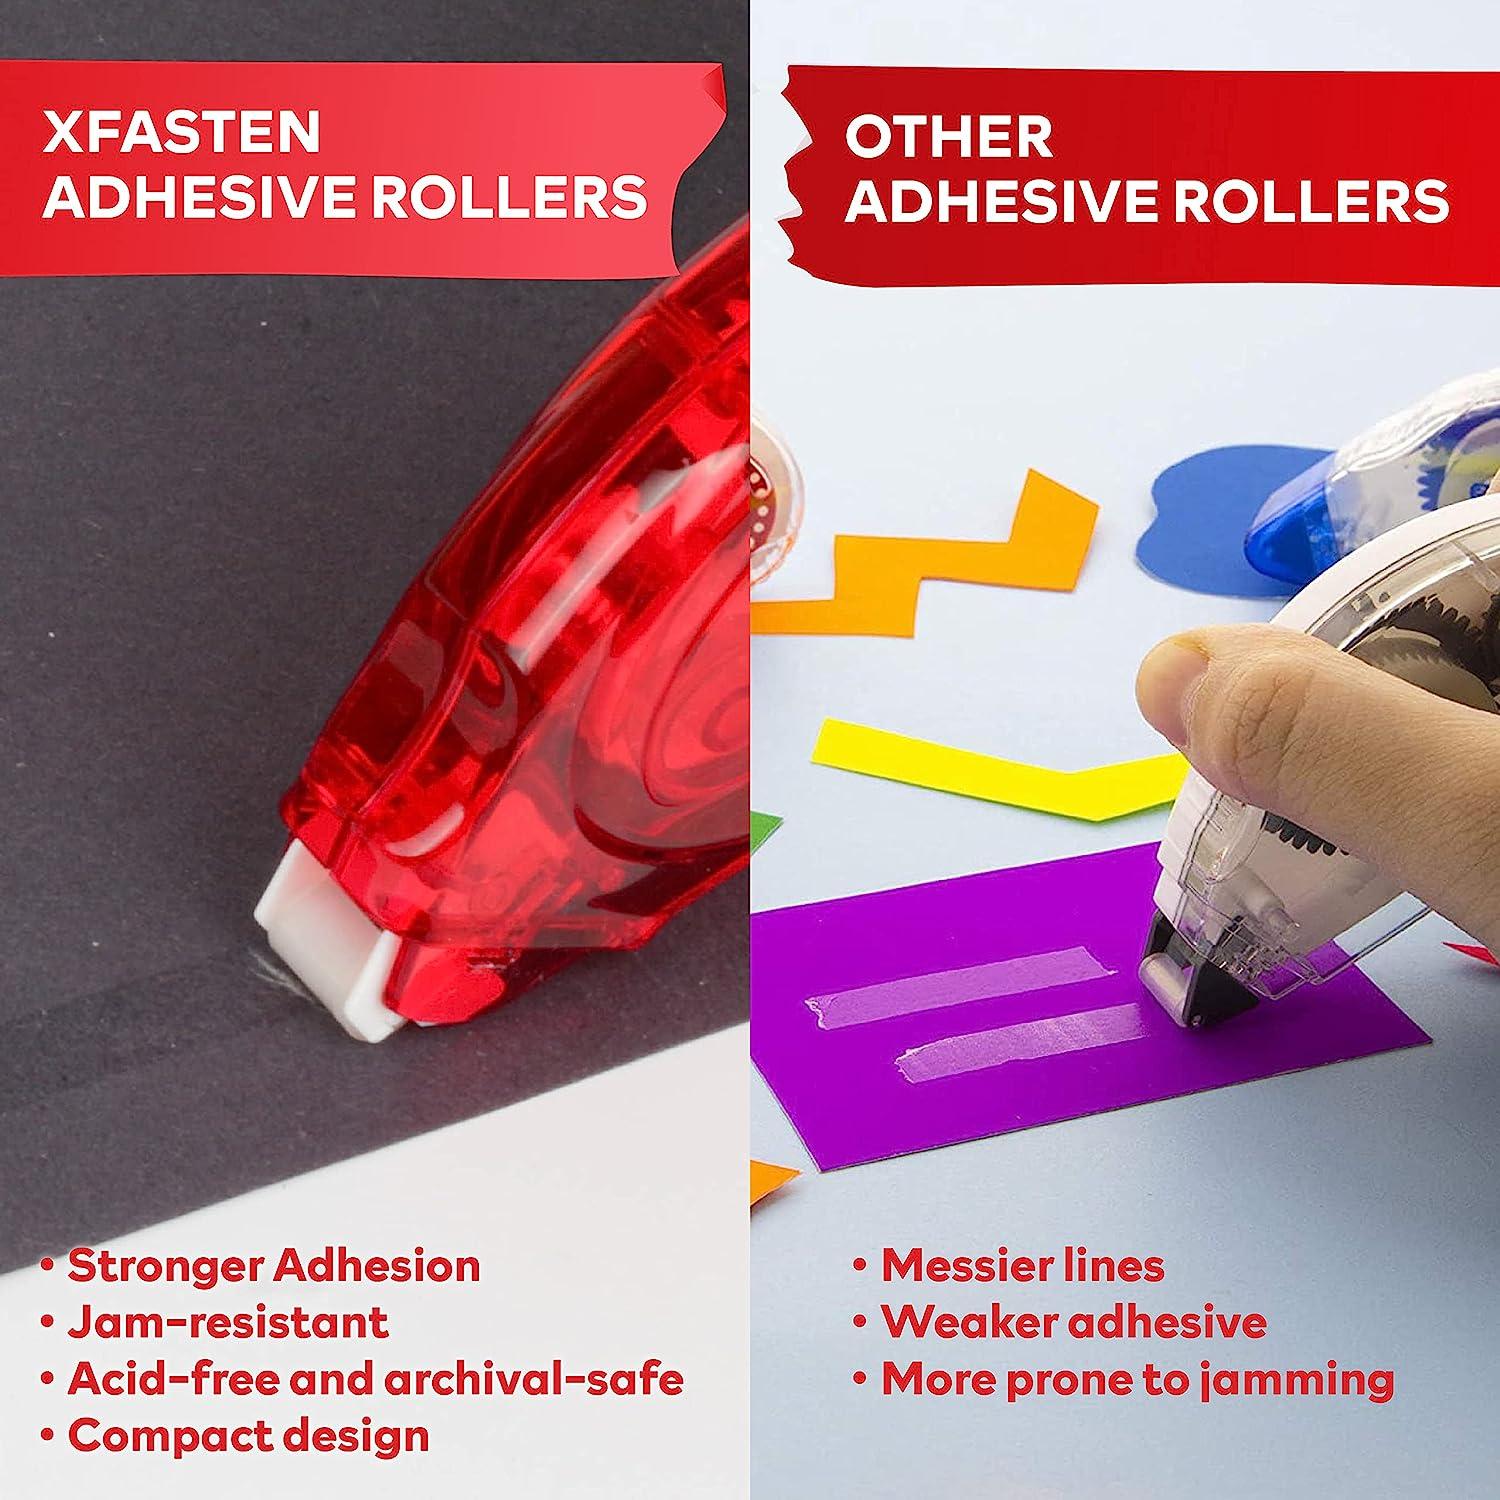 XFasten Adhesive Roller for Scrapbooking, 8mm x 30ft 4-Pack Double Sided  Glue Tape Roller, Scrapbook Supplies for Adults, Photo Tape for Scrapbooking  4-Pack, 0.3-inch by 360-Inch Red Shell (Clear Tape)